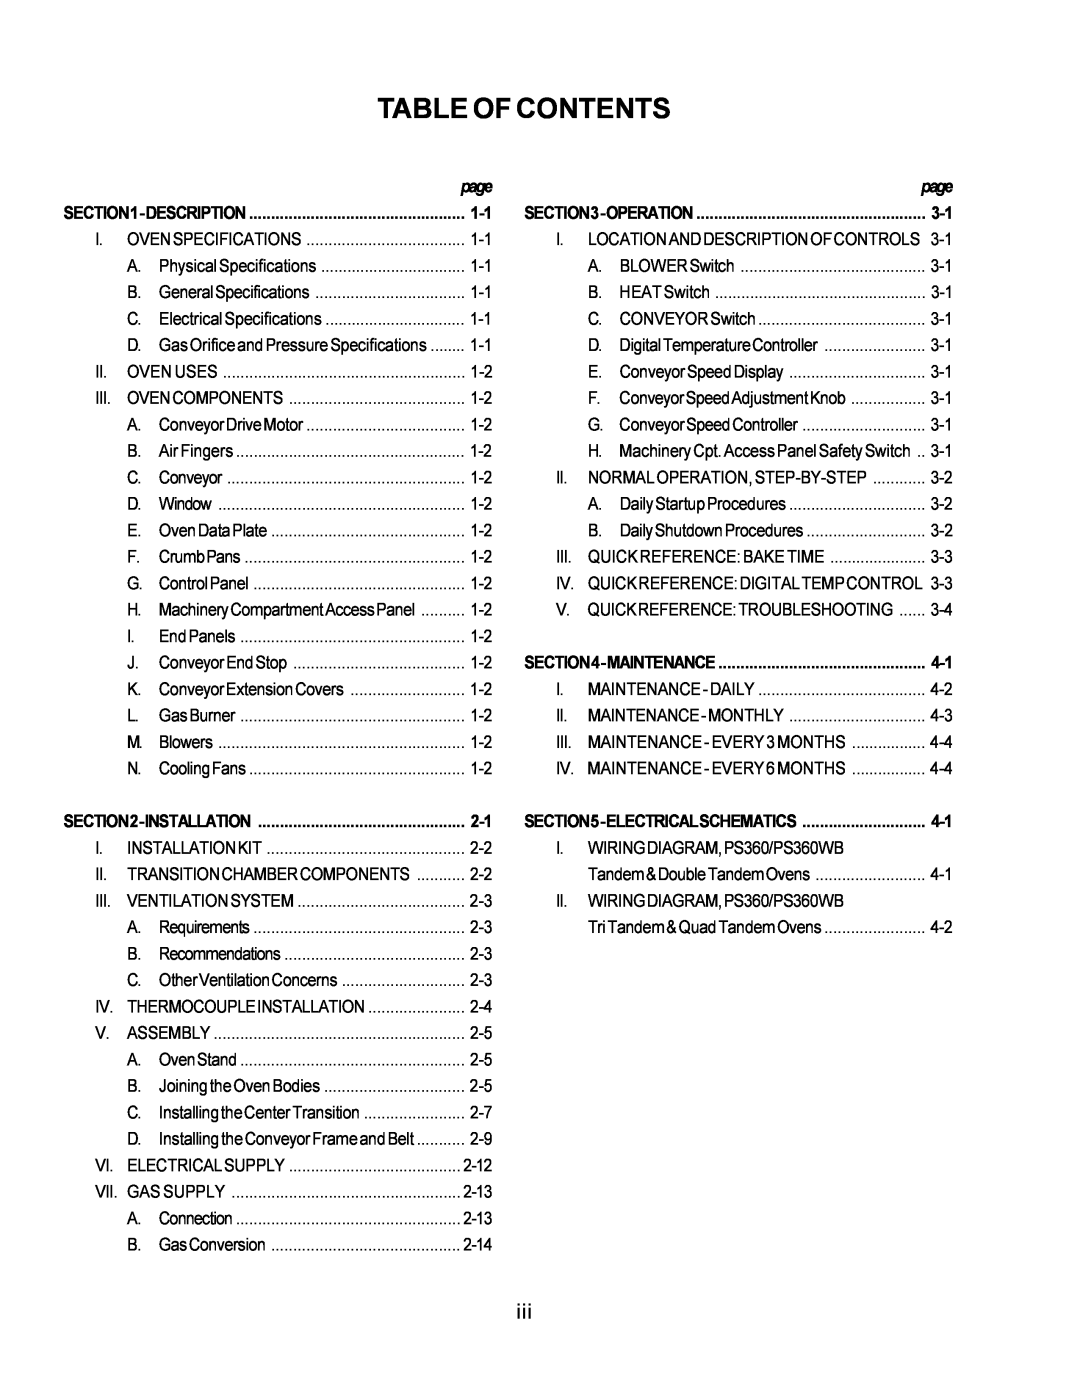 Middleby Marshall PS360WB installation manual Table Of Contents, page 